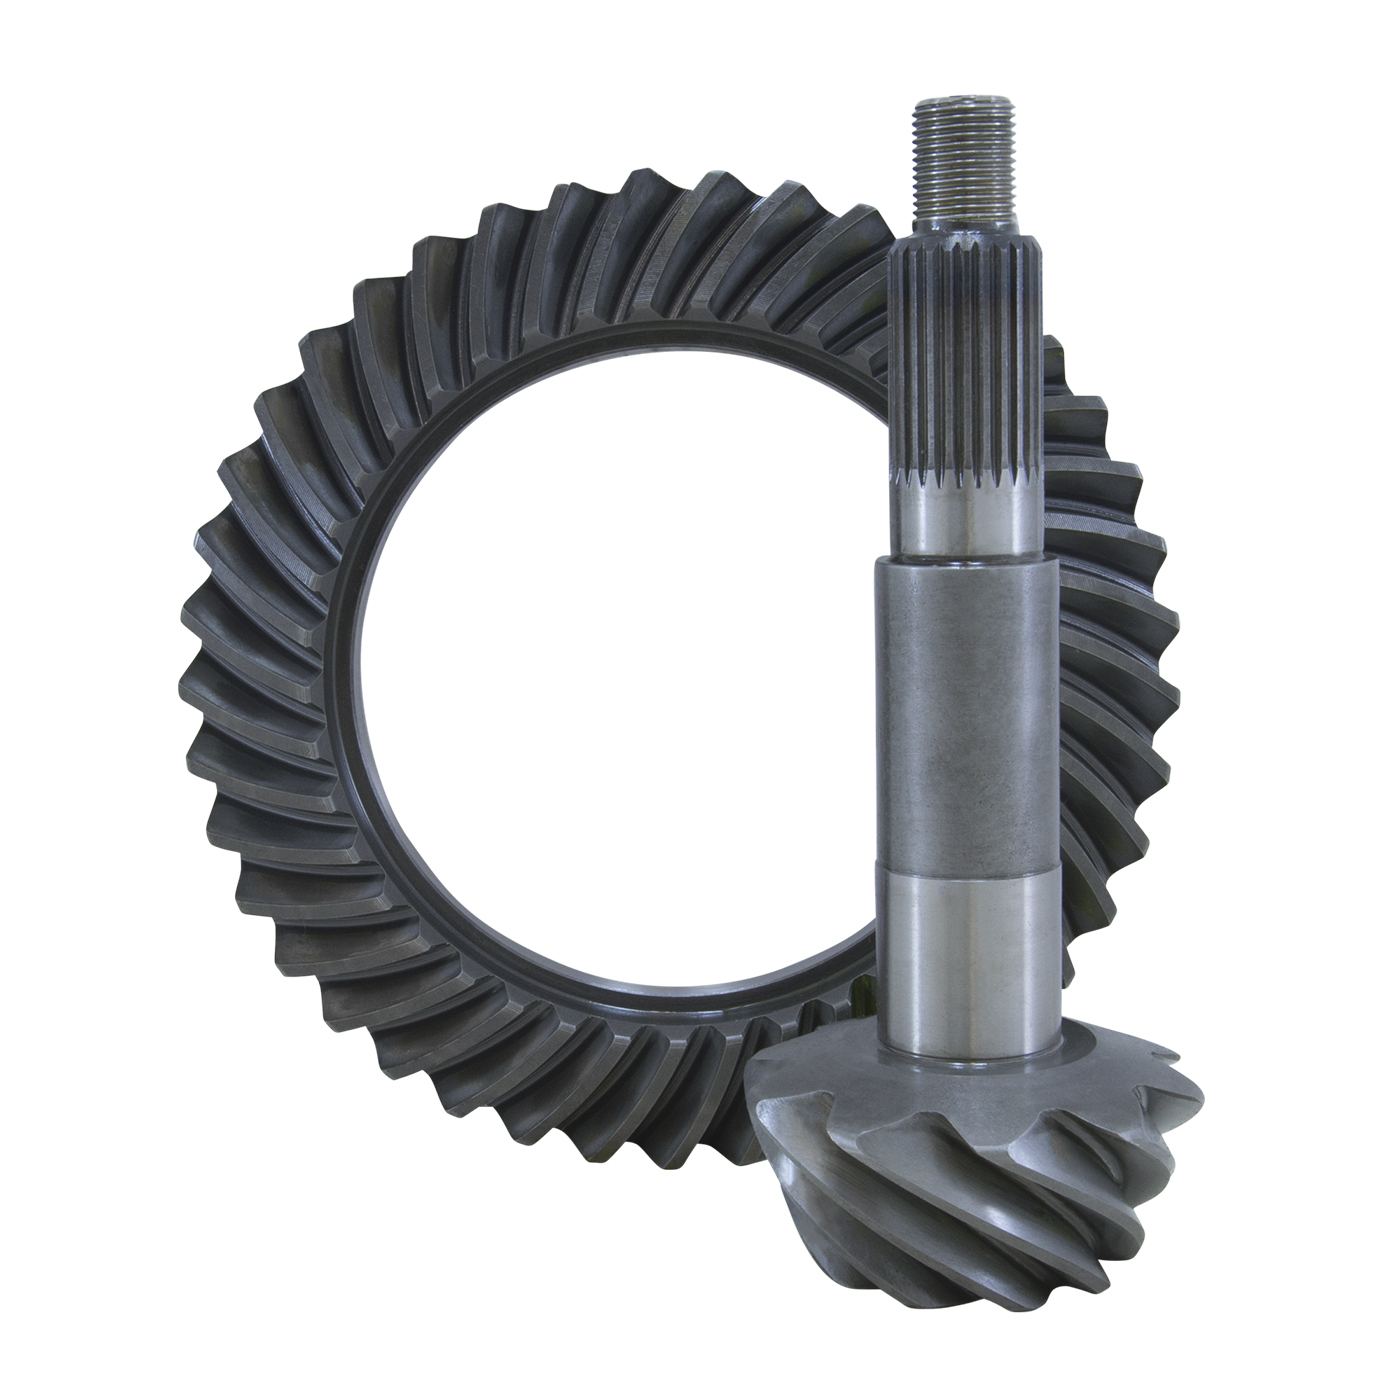 USA Standard 36046 Replacement Ring & Pinion Gear Set, For Dana Rubicon 44, 4.56 Ratio